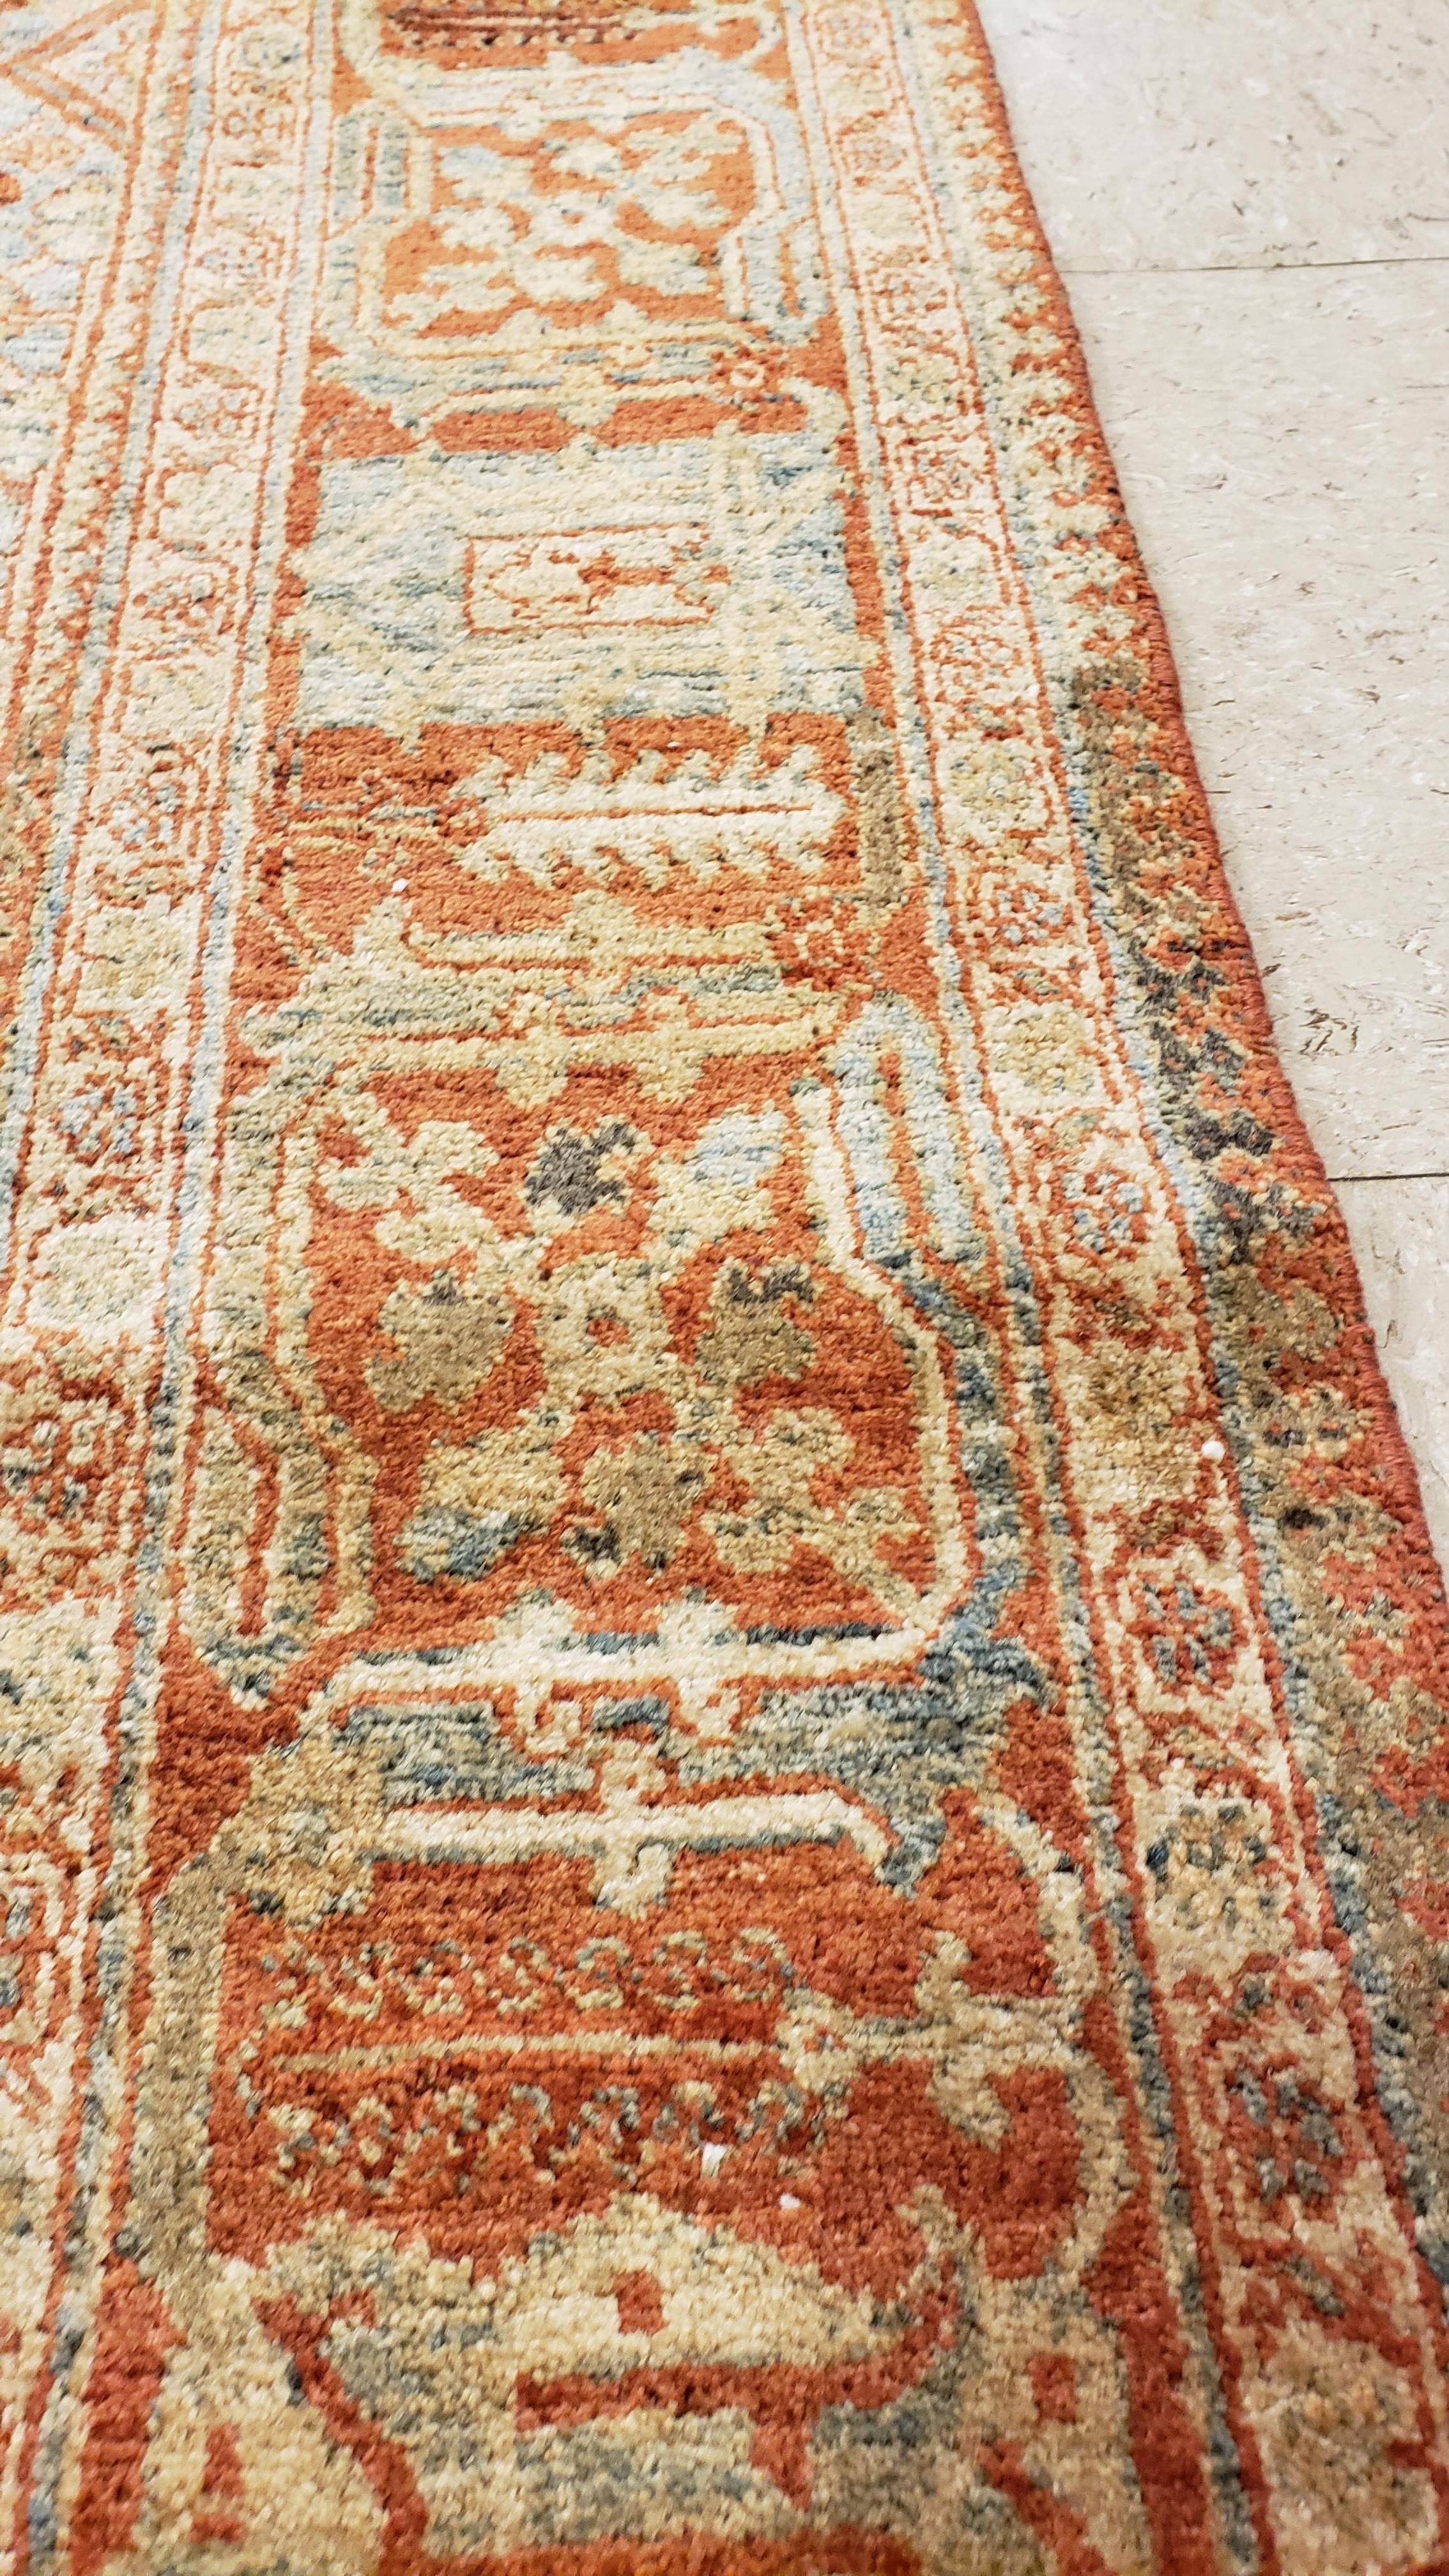 Antique Tabriz Rug, Handmade Oriental Rug in Terracotta, Light Blue and Taupe 1